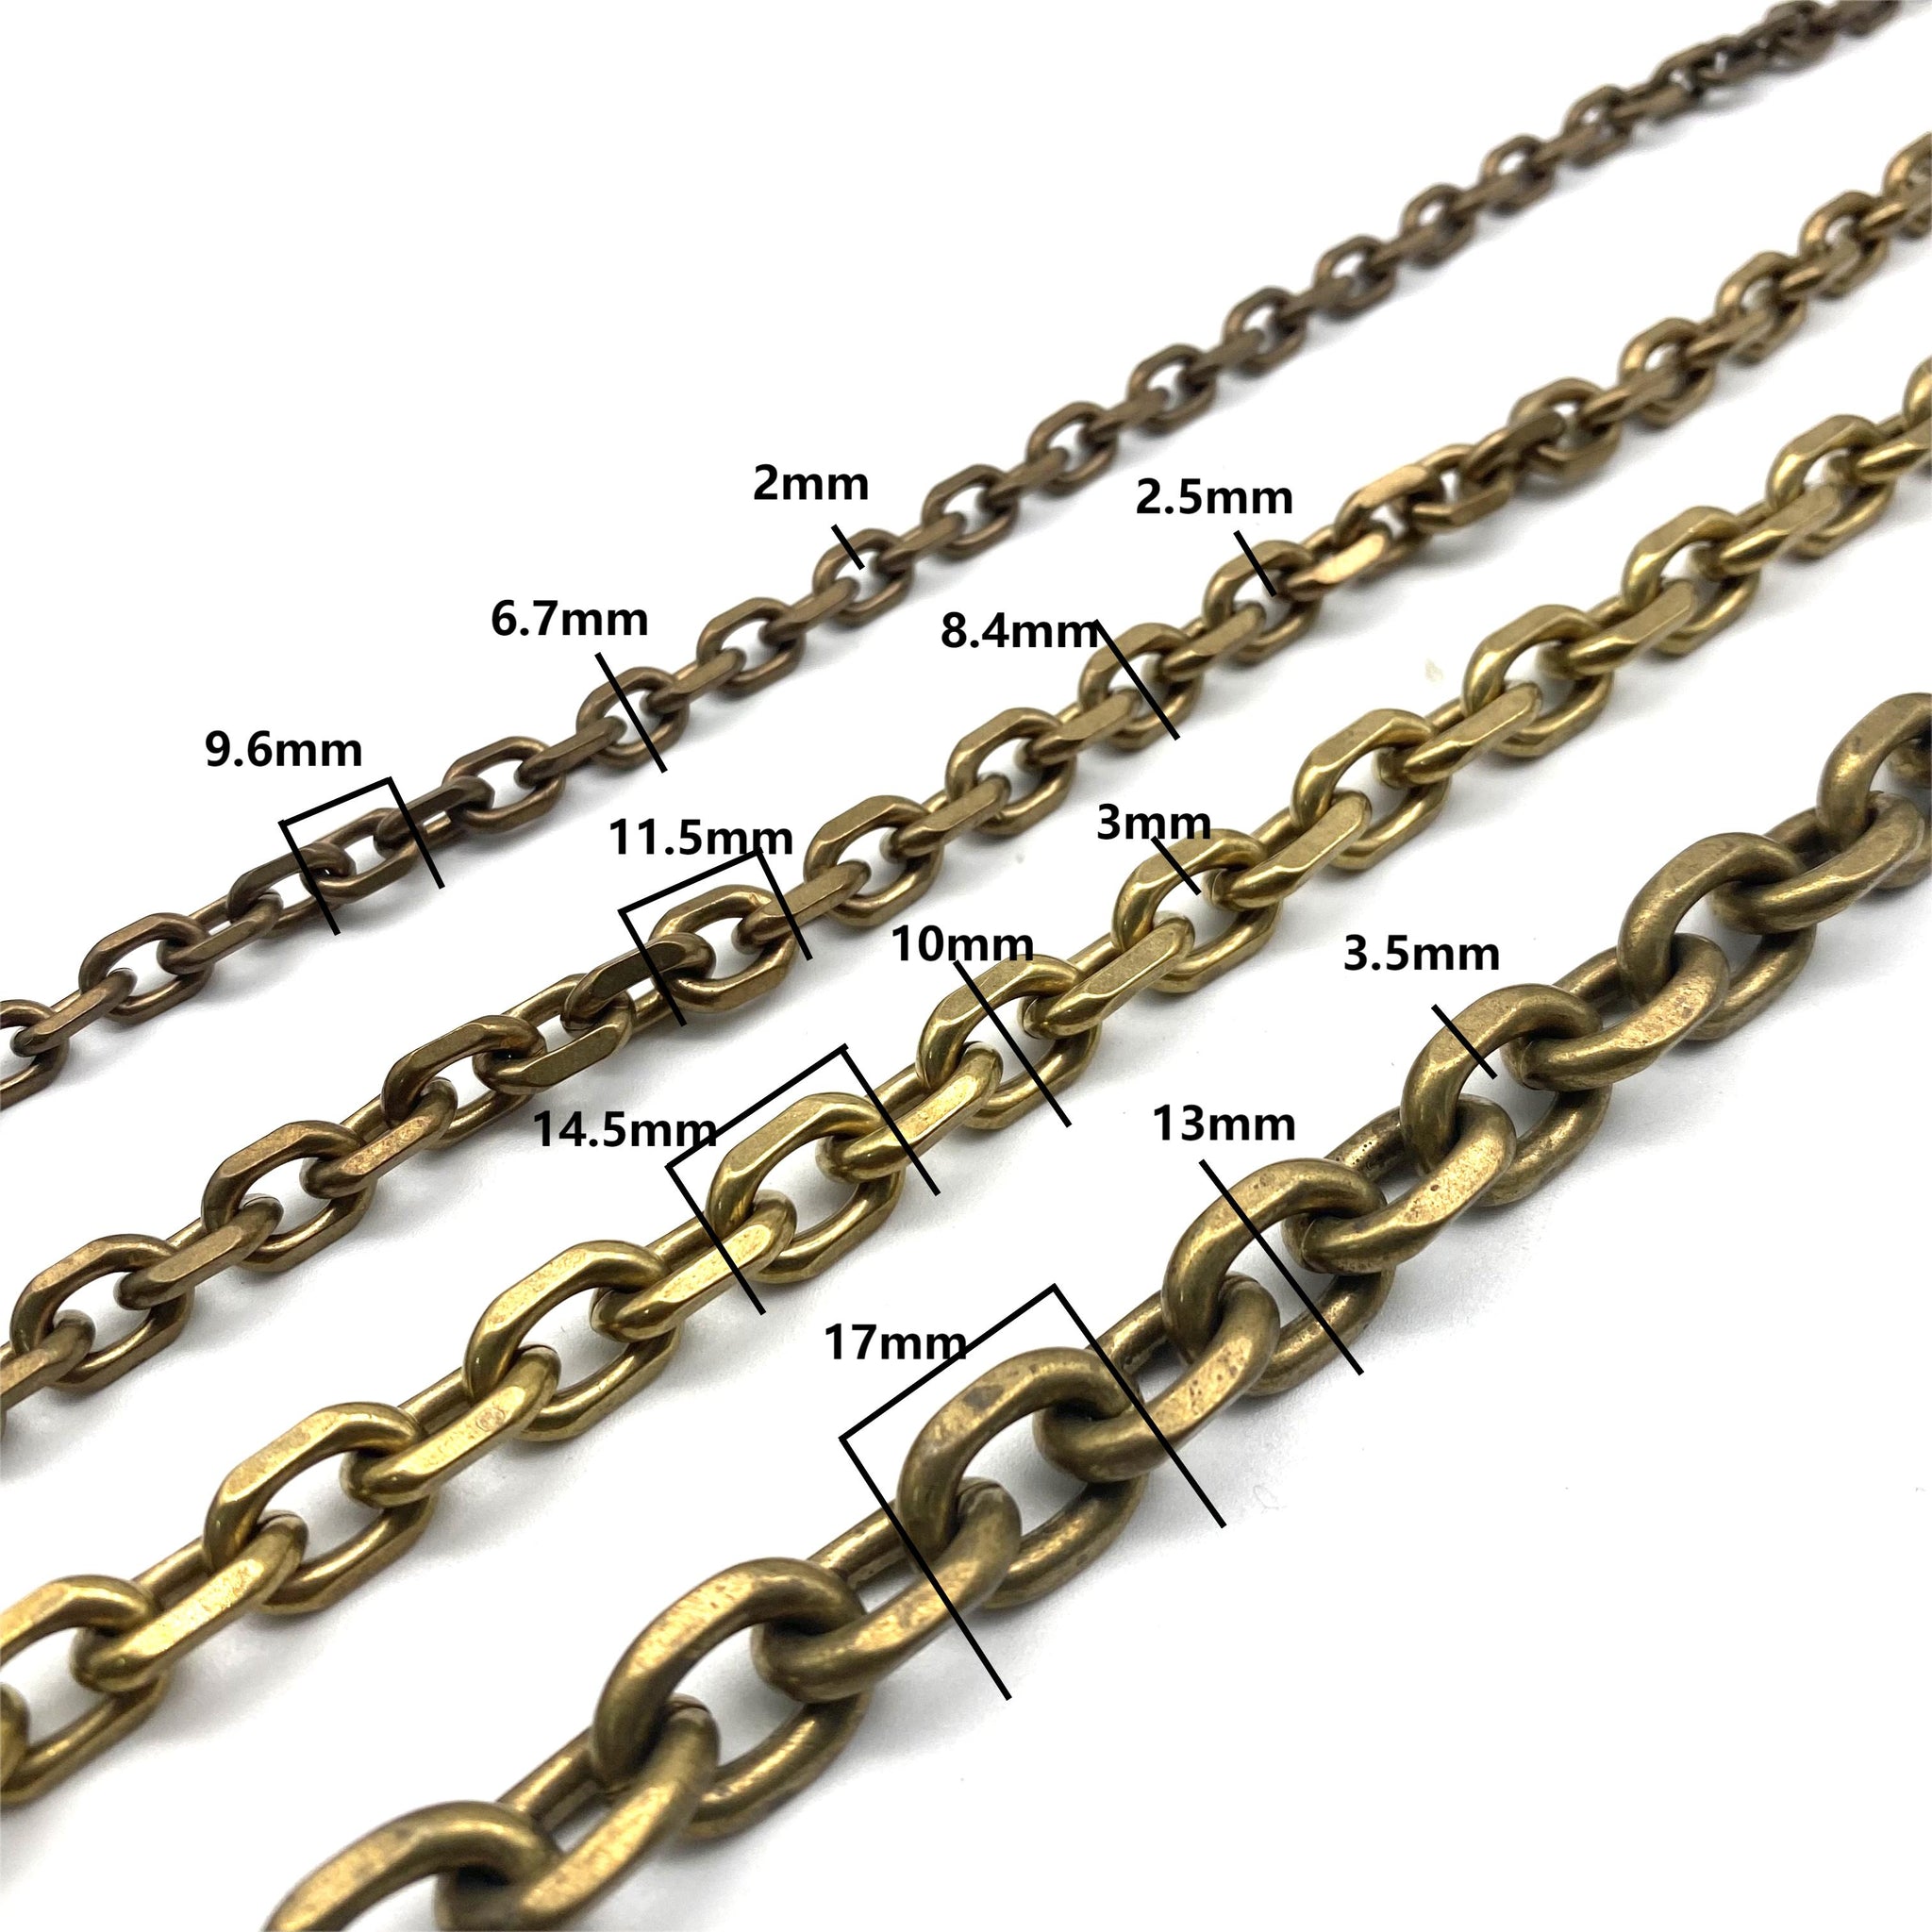 Metal Field Solid Brass Anchor Link Chain Leather Wallet Chains 2 x 6.7 x 9.6mm / 10